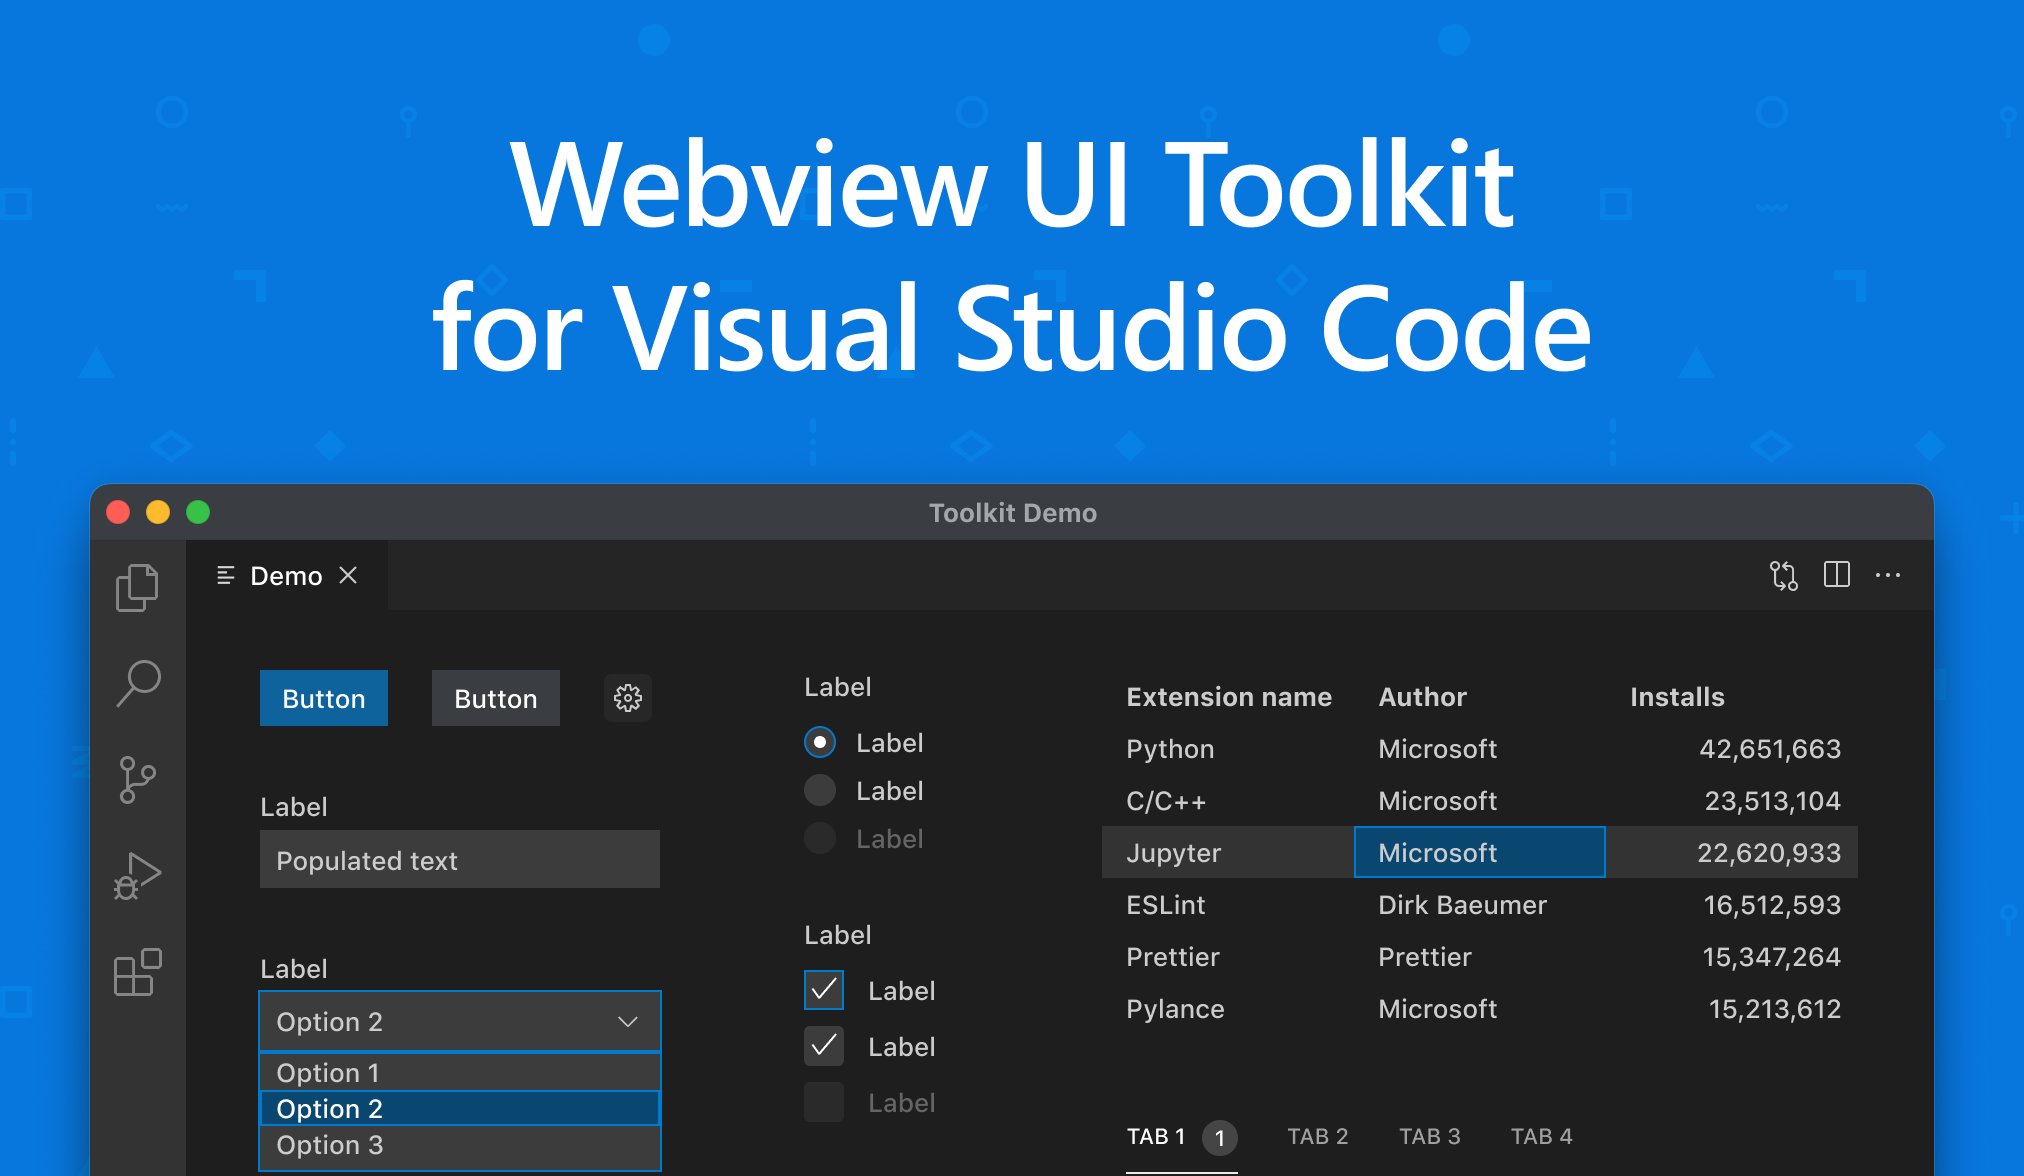 Tooltip image showing the Webview UI Toolkit components inside VS Code.